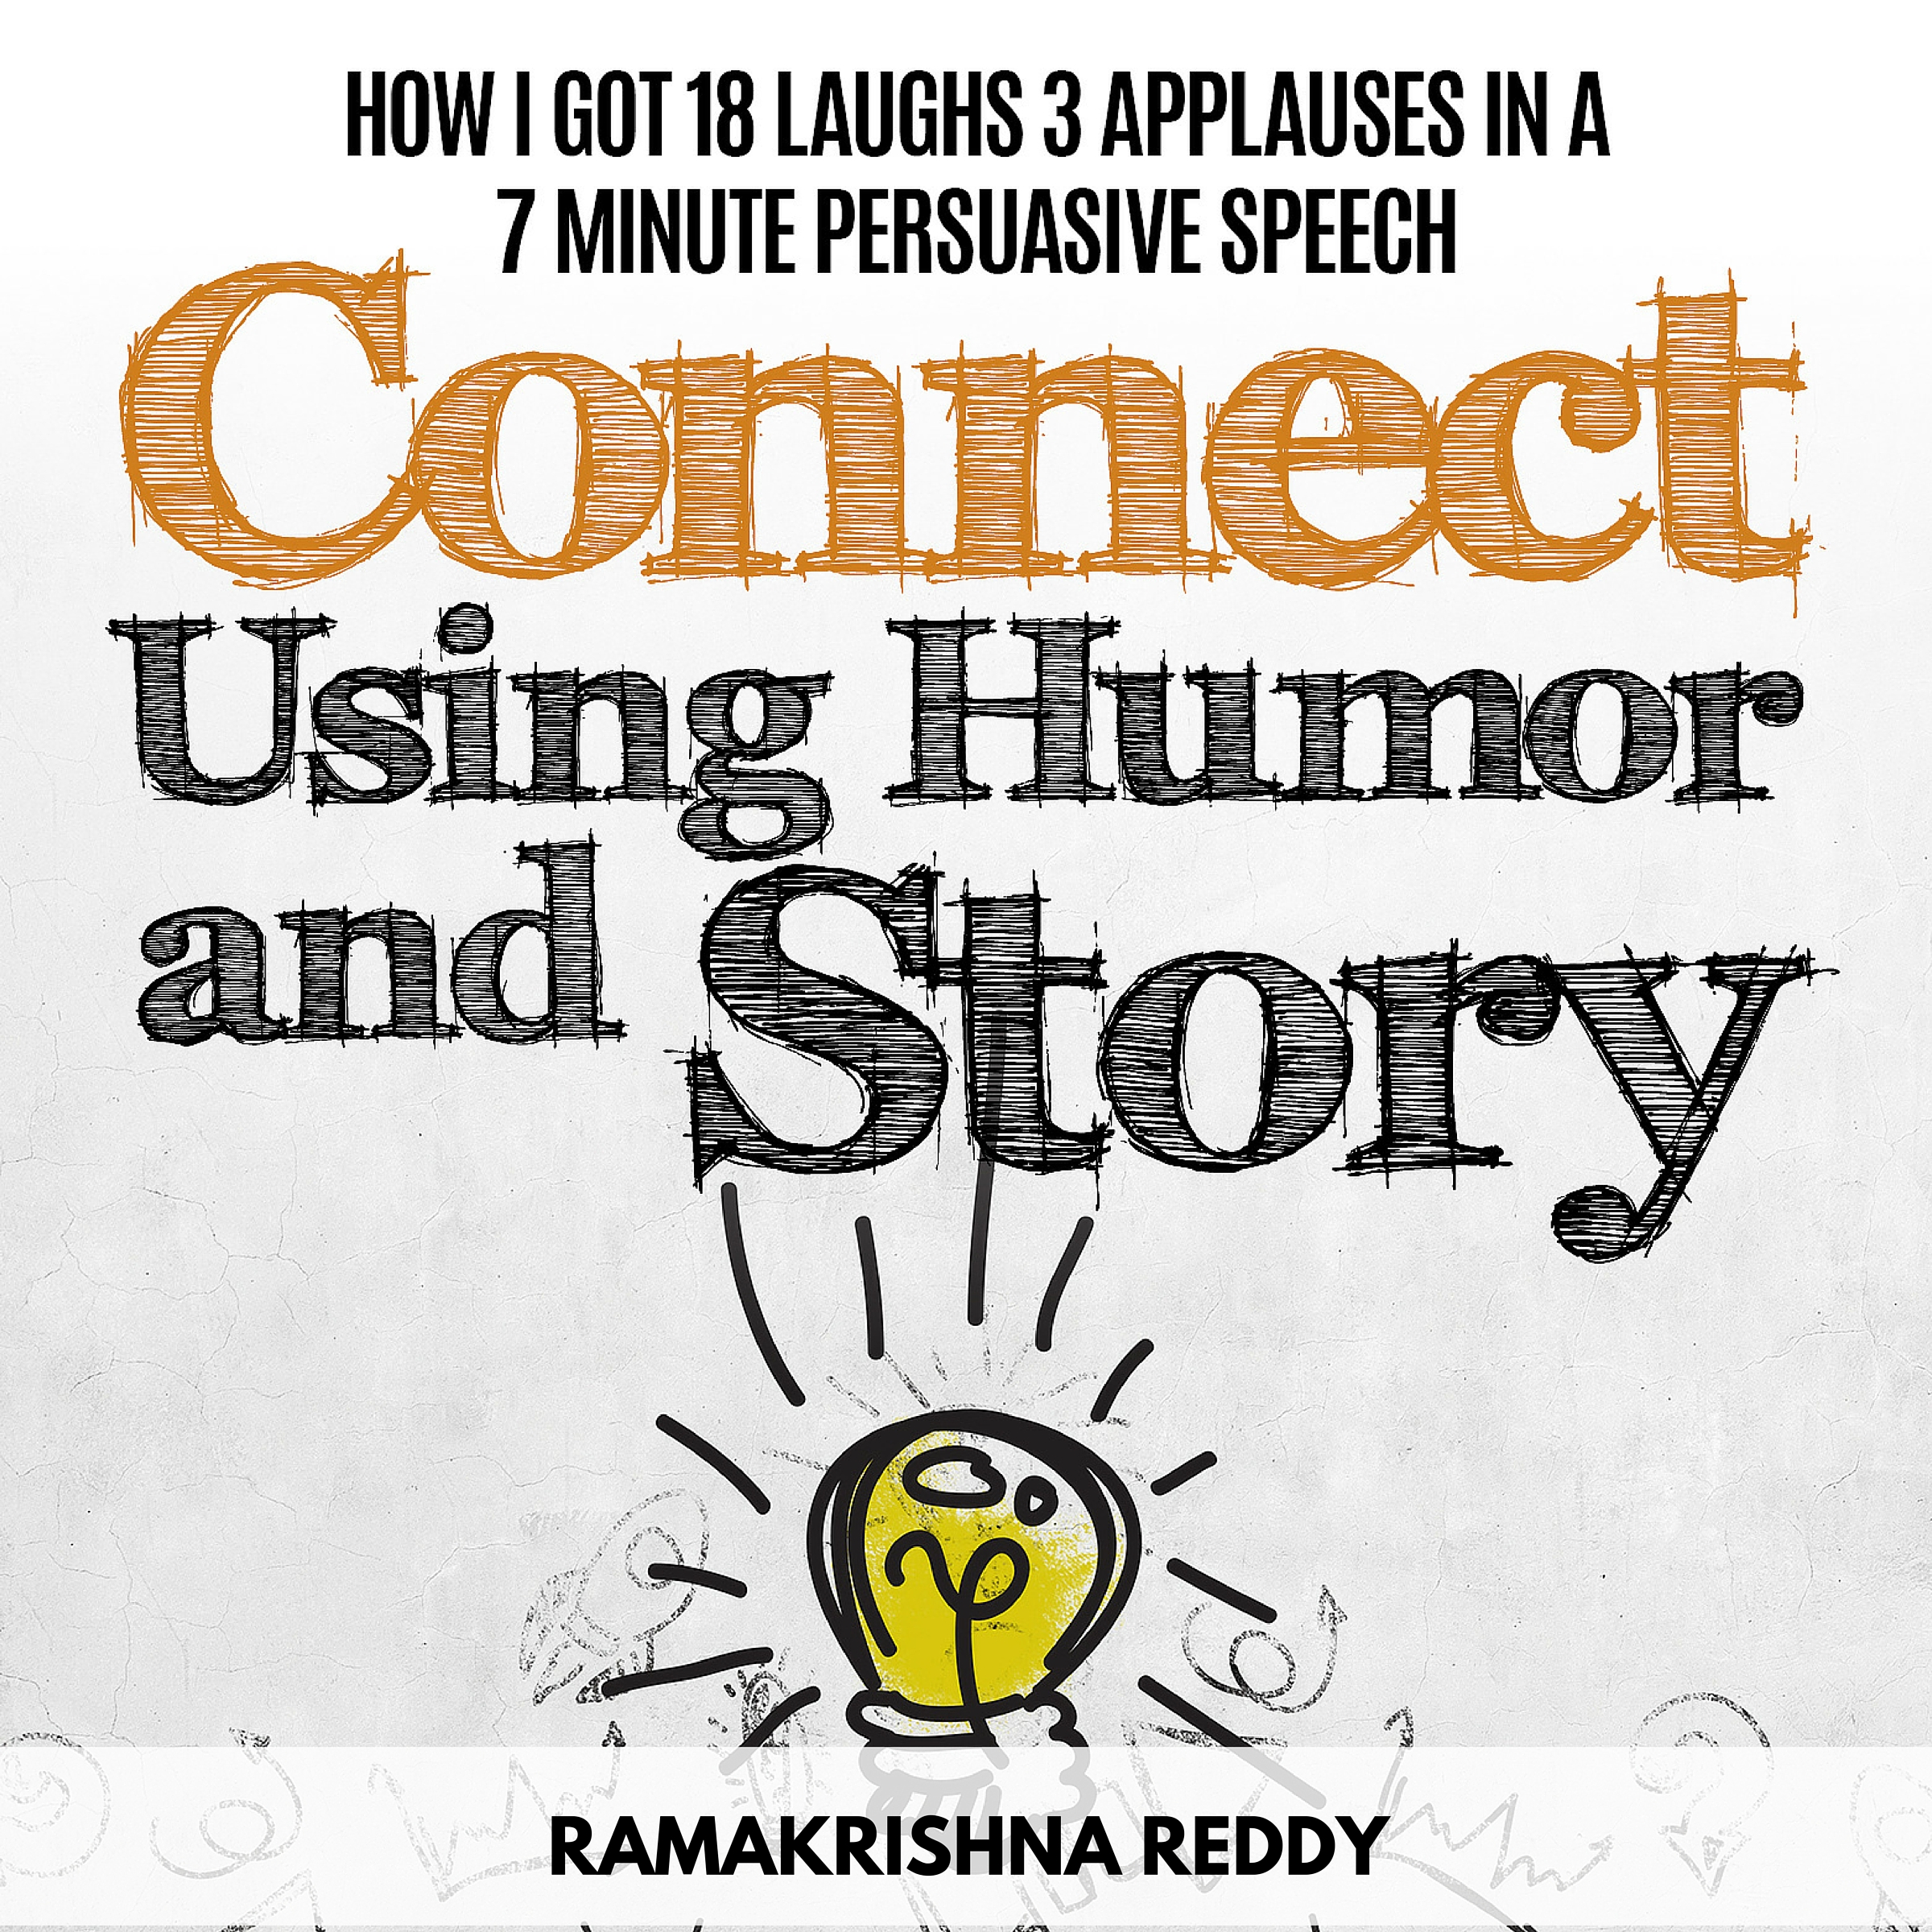 Connect using humor and story